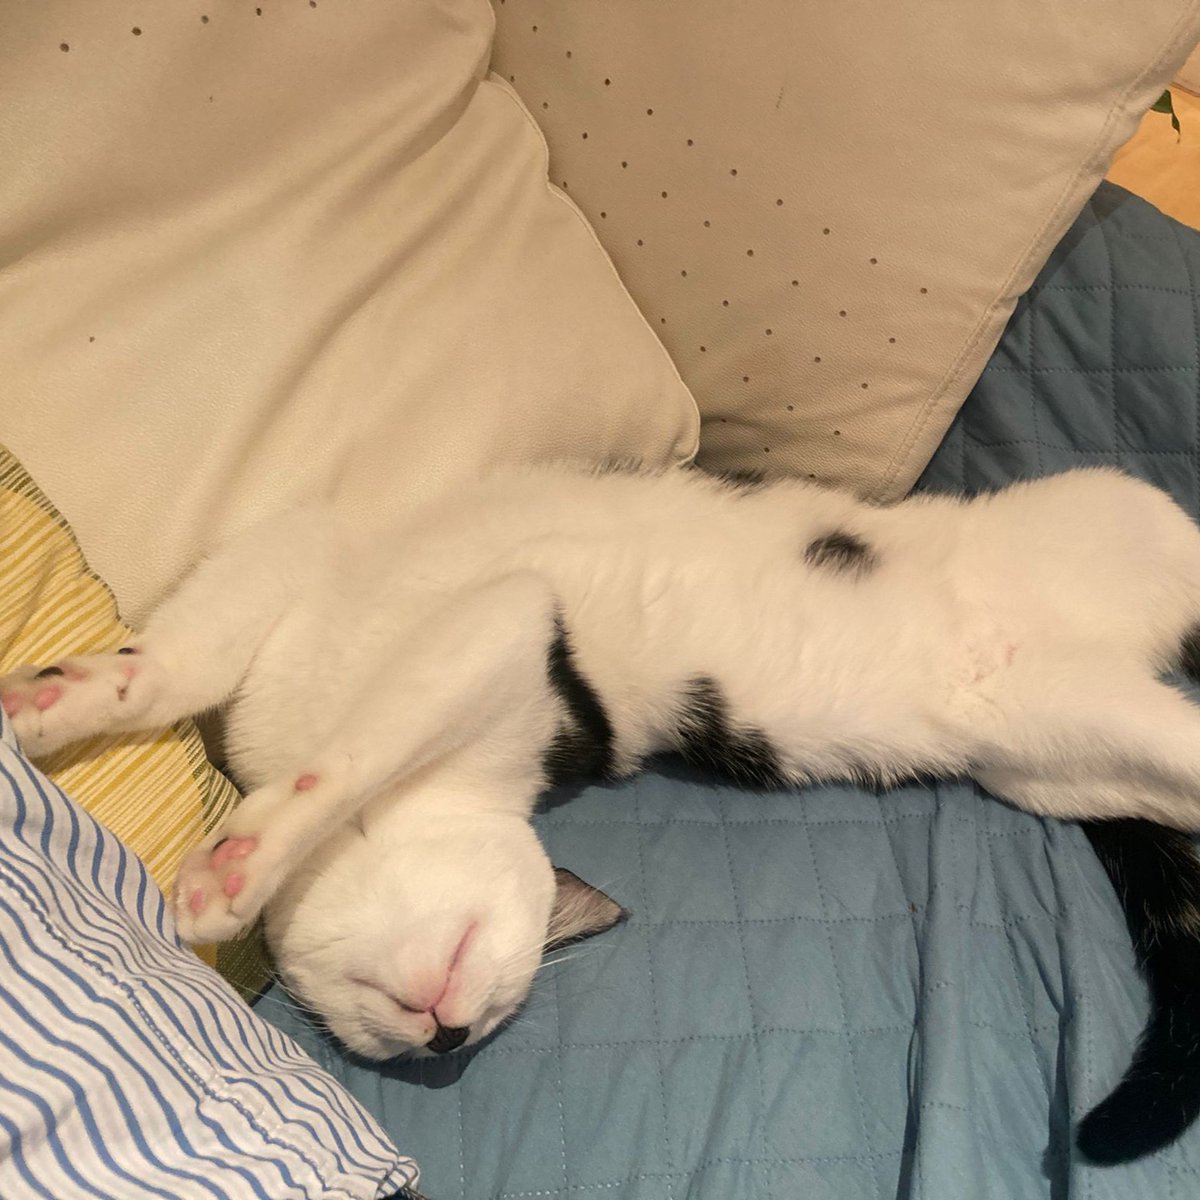 Stilton arrived as a young kitten. Since being adopted last year, he's made great progress. He's proven himself to be a very good little brother to his sibling, Jack. He loves playing and chasing anything that moves. And of course, he loves his new family. 💜 #HappilyRehomed.